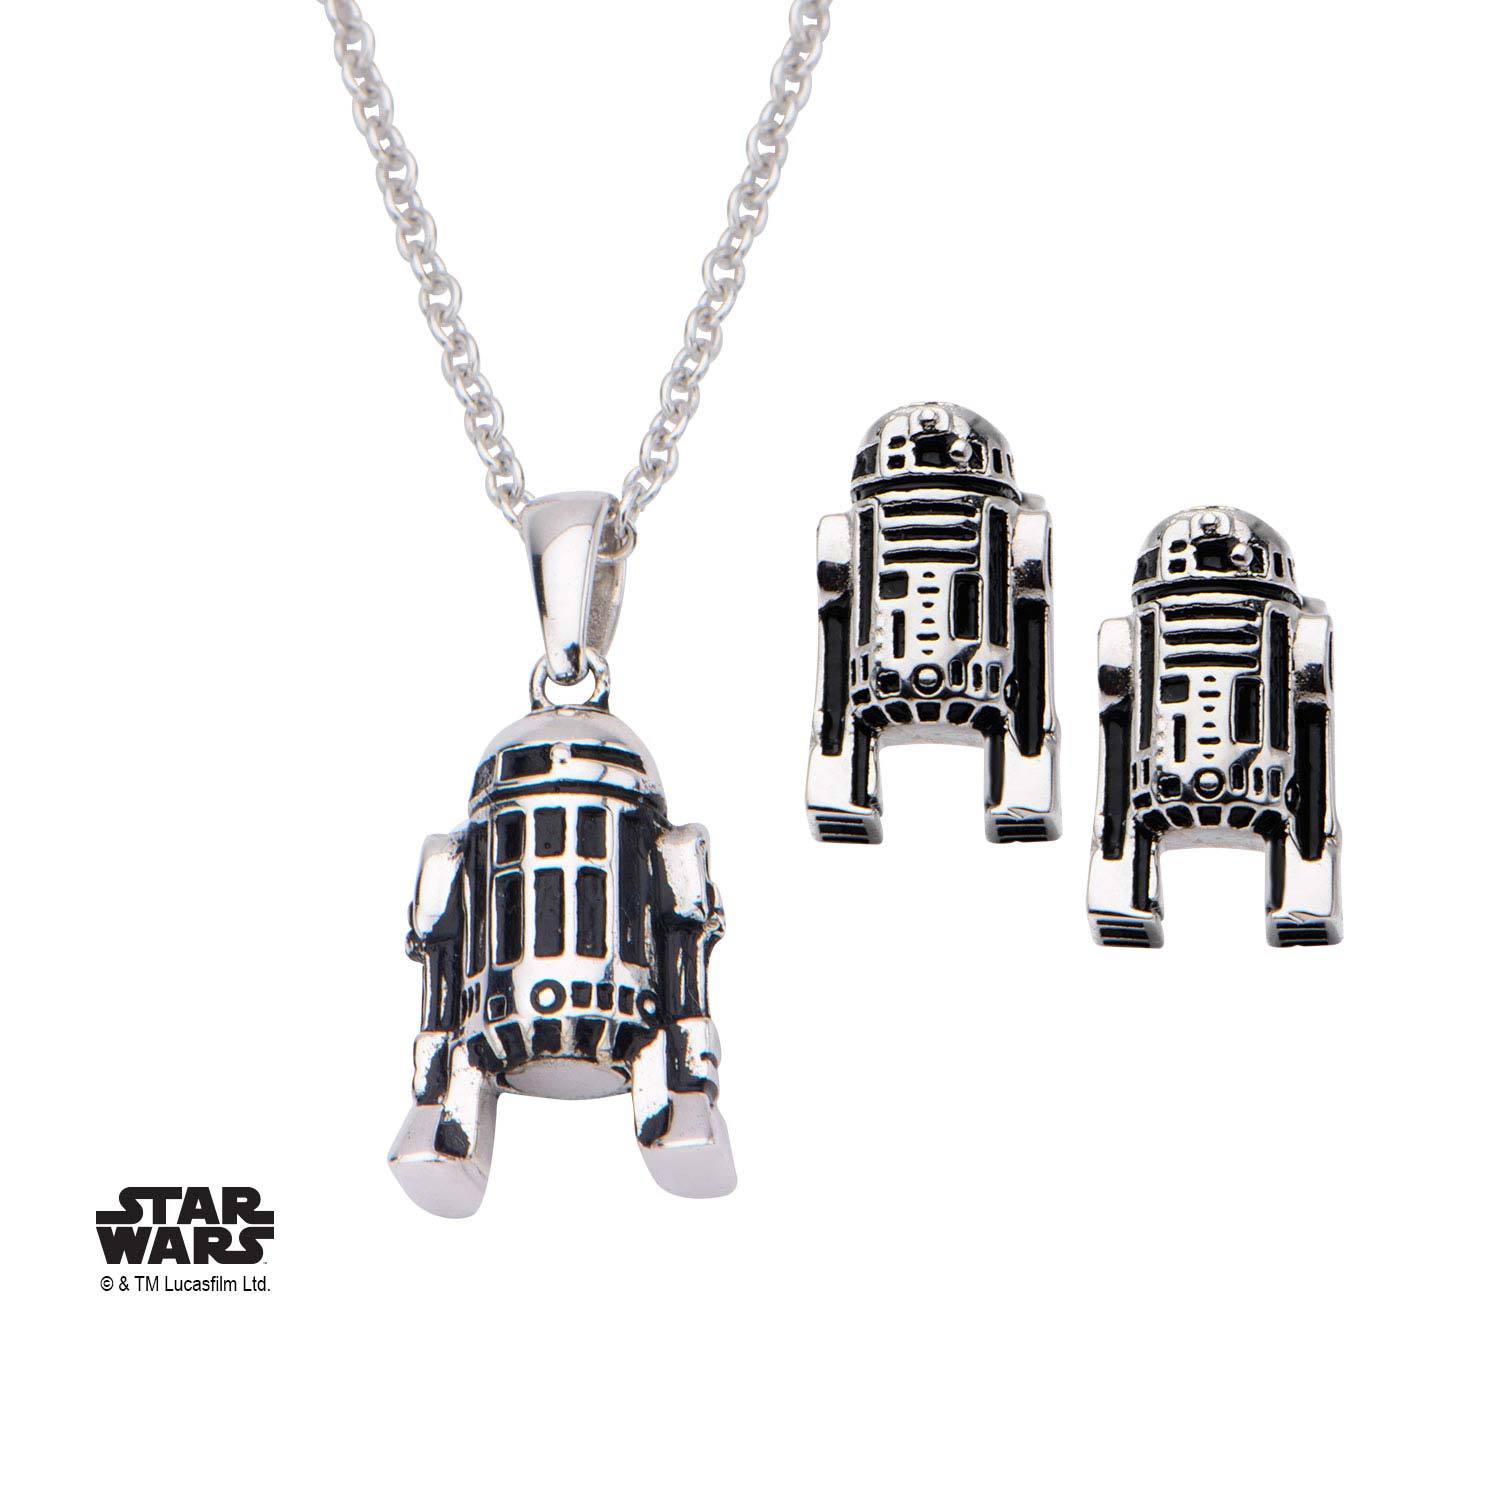 Star Wars 3D R2-D2 Stud Earrings and Pendant Necklace Set